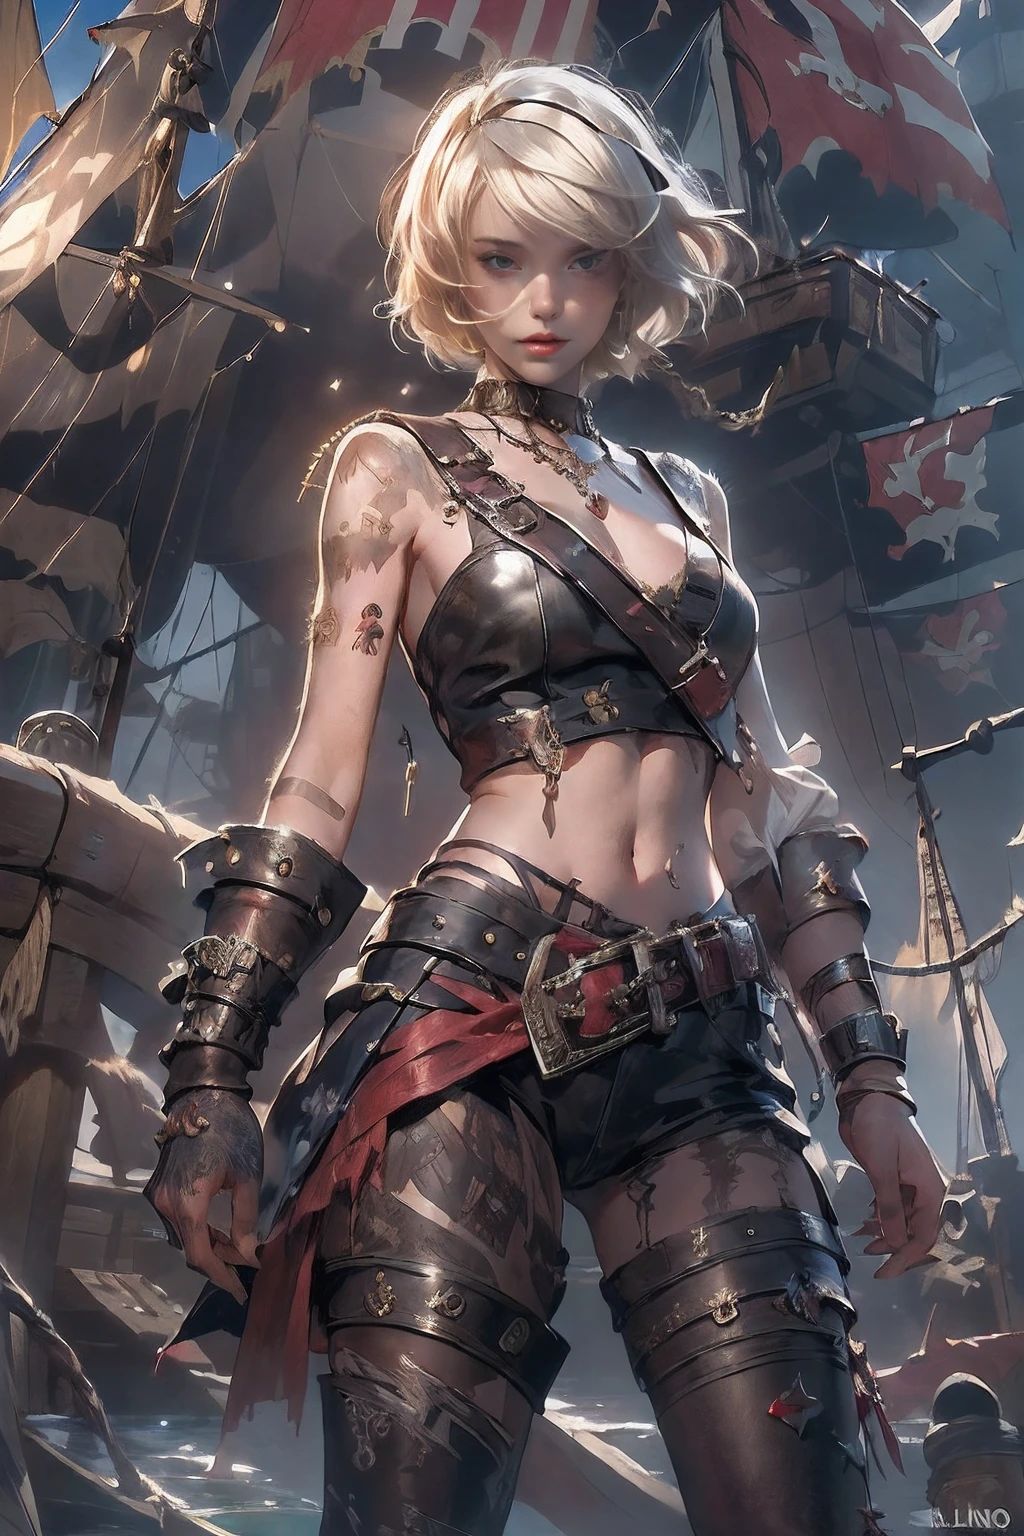 ((top-quality、8K、32K、​masterpiece、nffsw:1.3)), (superfine illustration)、(超A high resolution), (((adult body))), (((1girl in))), ((( Bob Shorthair ))), 25-year-old pirate with a perfect body, Pirate hat with metal spines,Beautiful and well-groomed face, (( Bob Shorthair )), Small leather panties,pirate clothing, Almost naked in Simon Bisley's urban savage style, short blond hair, Minimum clothing, Metal protection on the left arm with complex graphics, Dark red with white stars and blue and white stripes, s Armor, Poison tattoo (((Image from the knee up))), short white blonde hair, pirate ship background